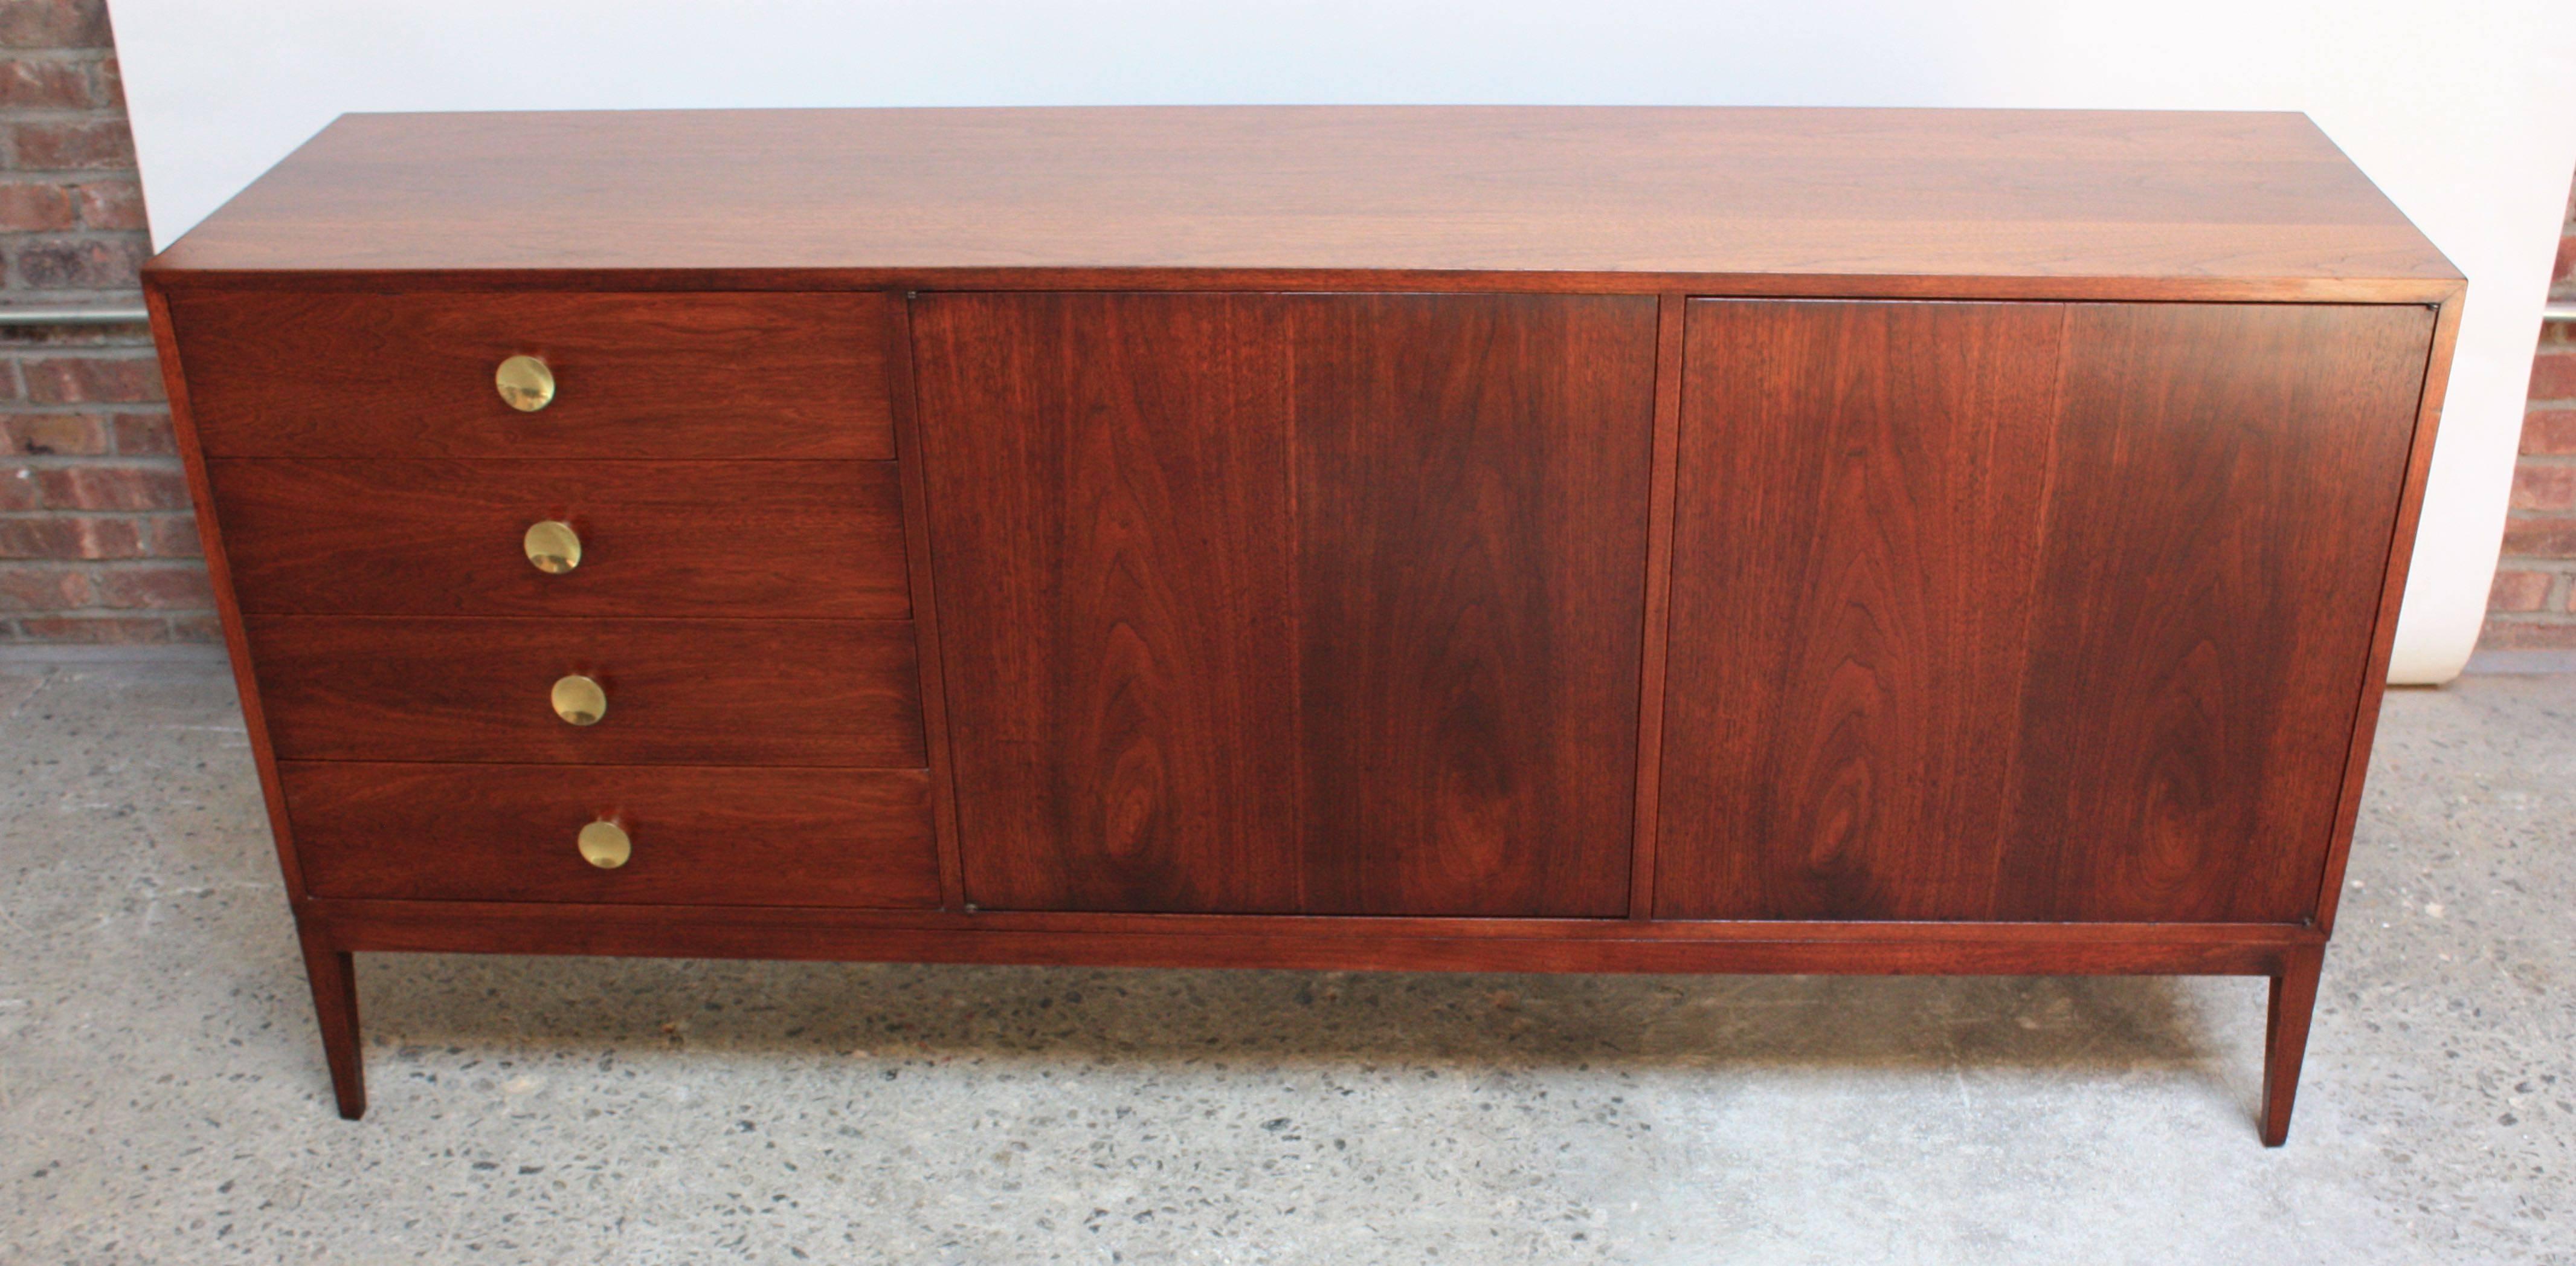 This exquisite credenza in walnut features four drawers with circular brass pulls and two bi-fold doors that open to reveal an additional eight drawers. This versatile piece offers sufficient storage for use as a dresser in a bedroom or a credenza.